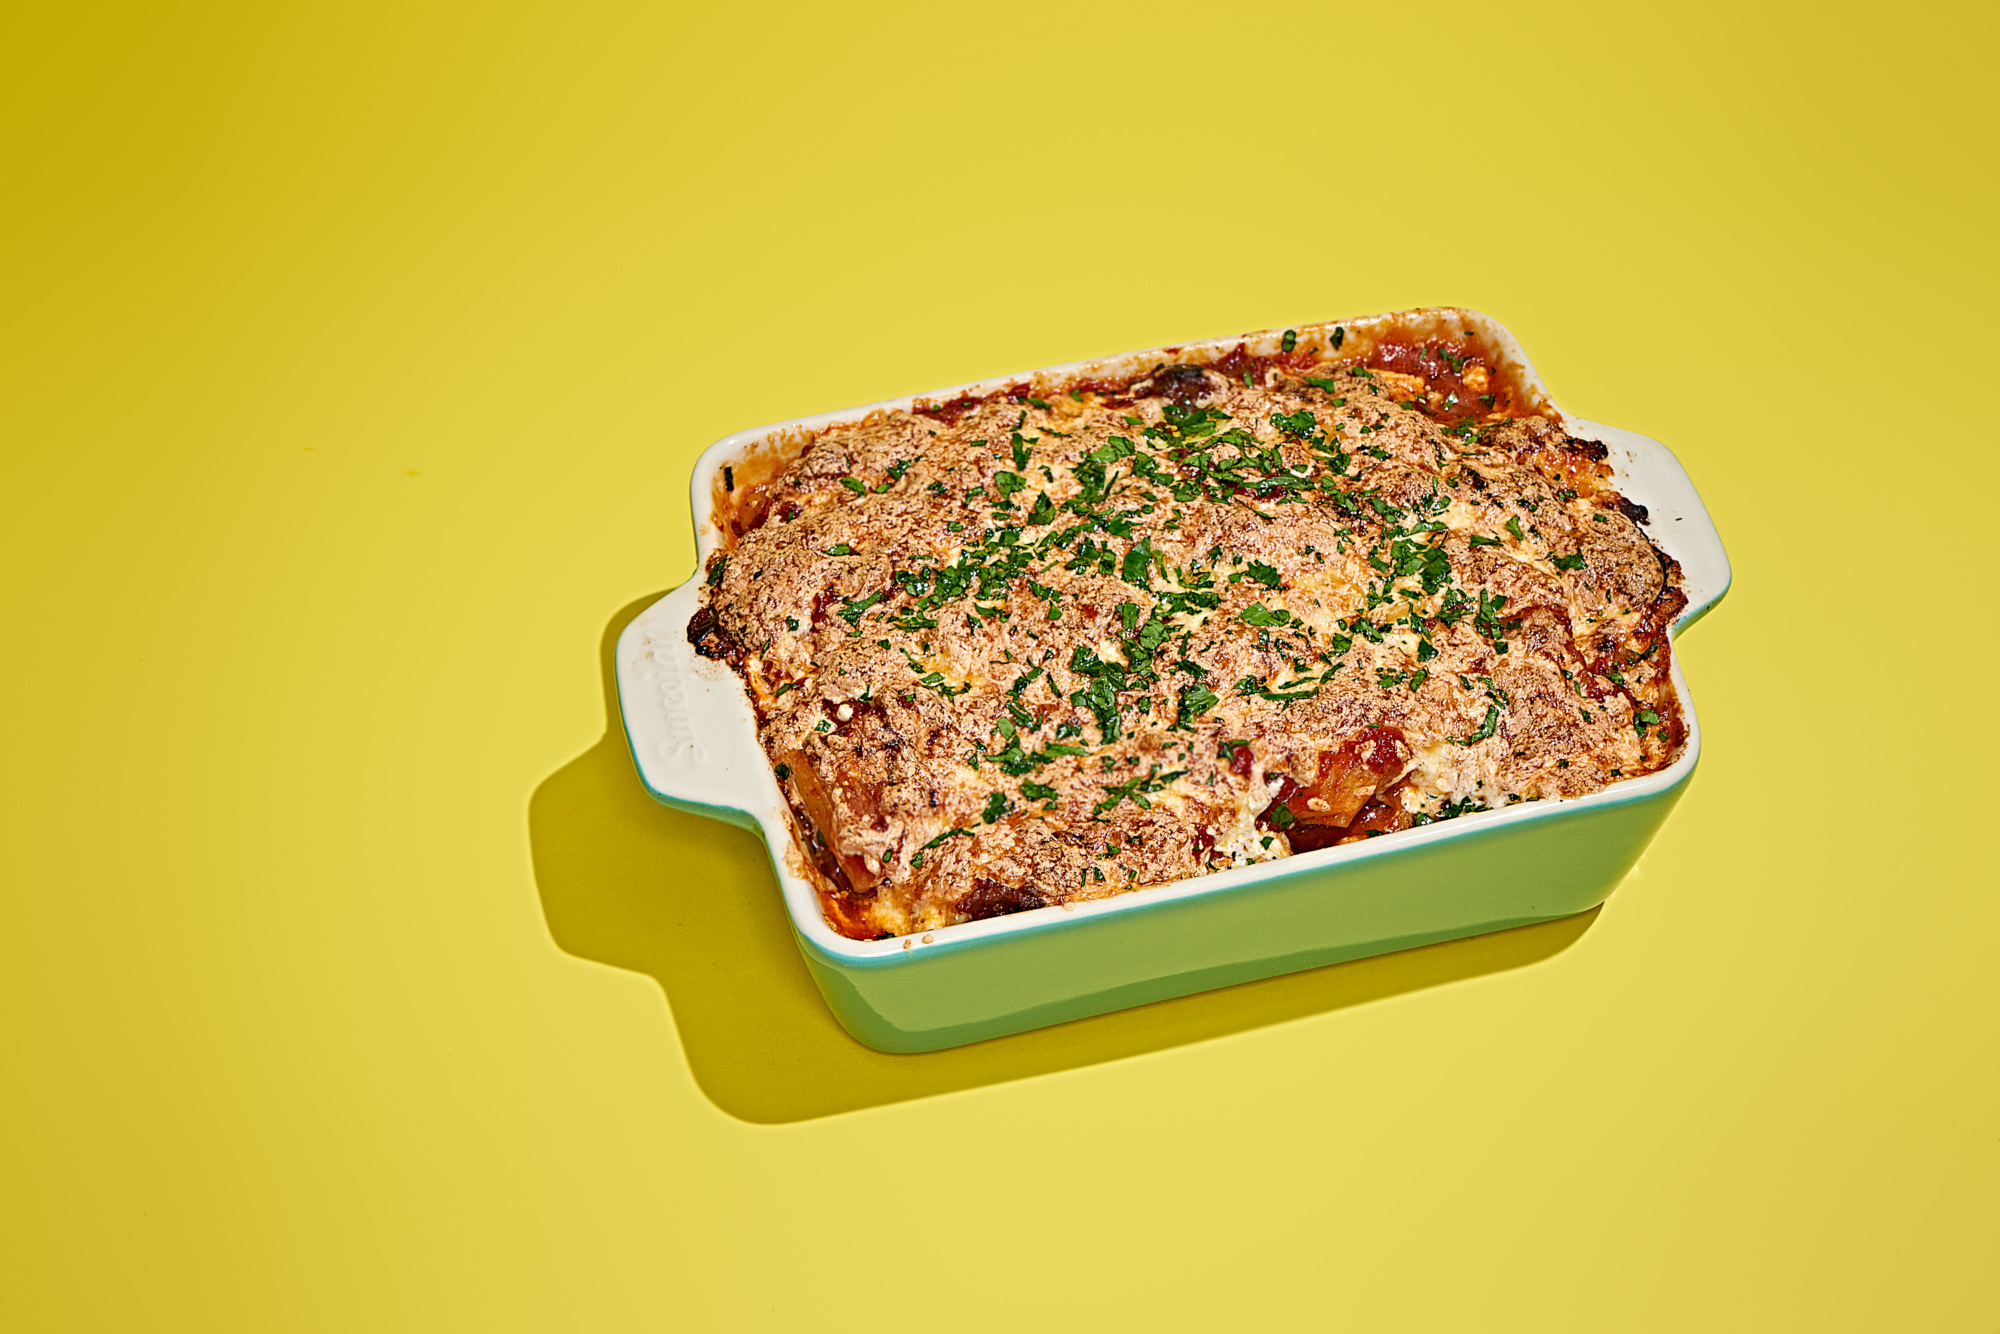 The mostaccioli is Baxtrom's take on a baked ziti.